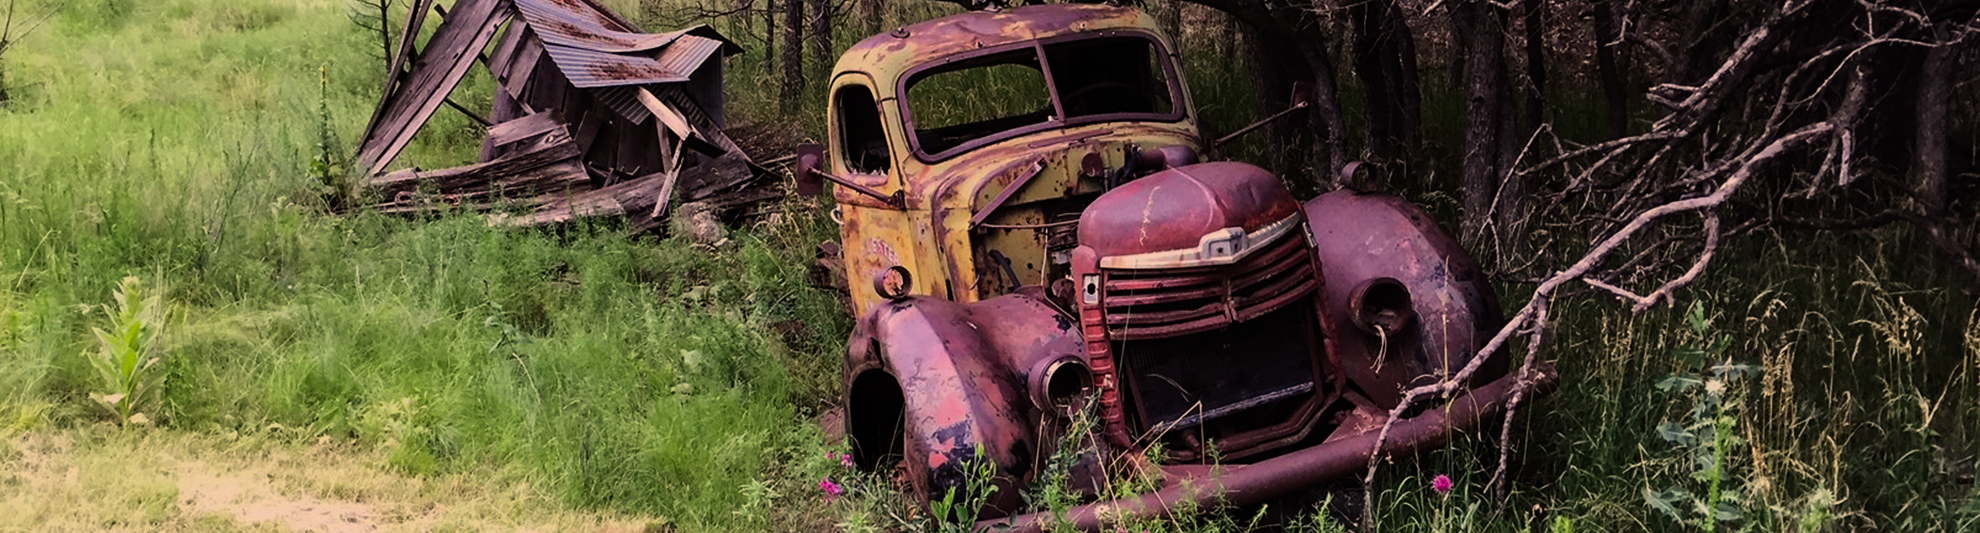 image of old truck